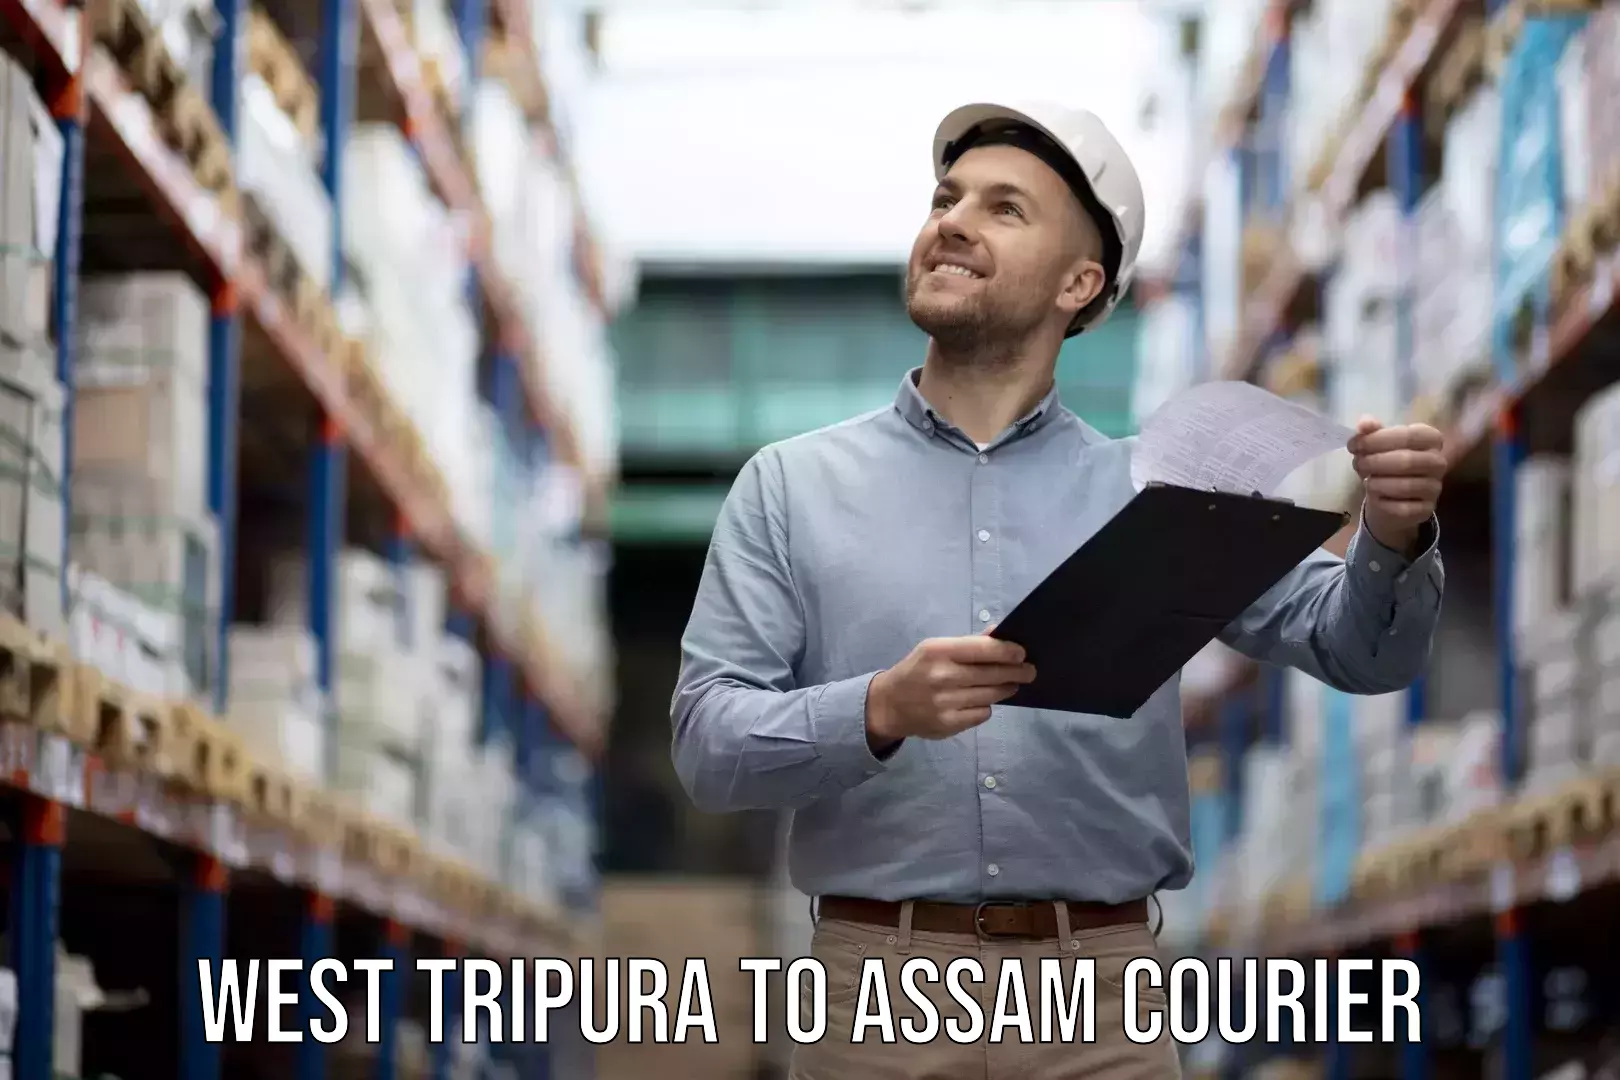 Furniture moving assistance West Tripura to Cachar